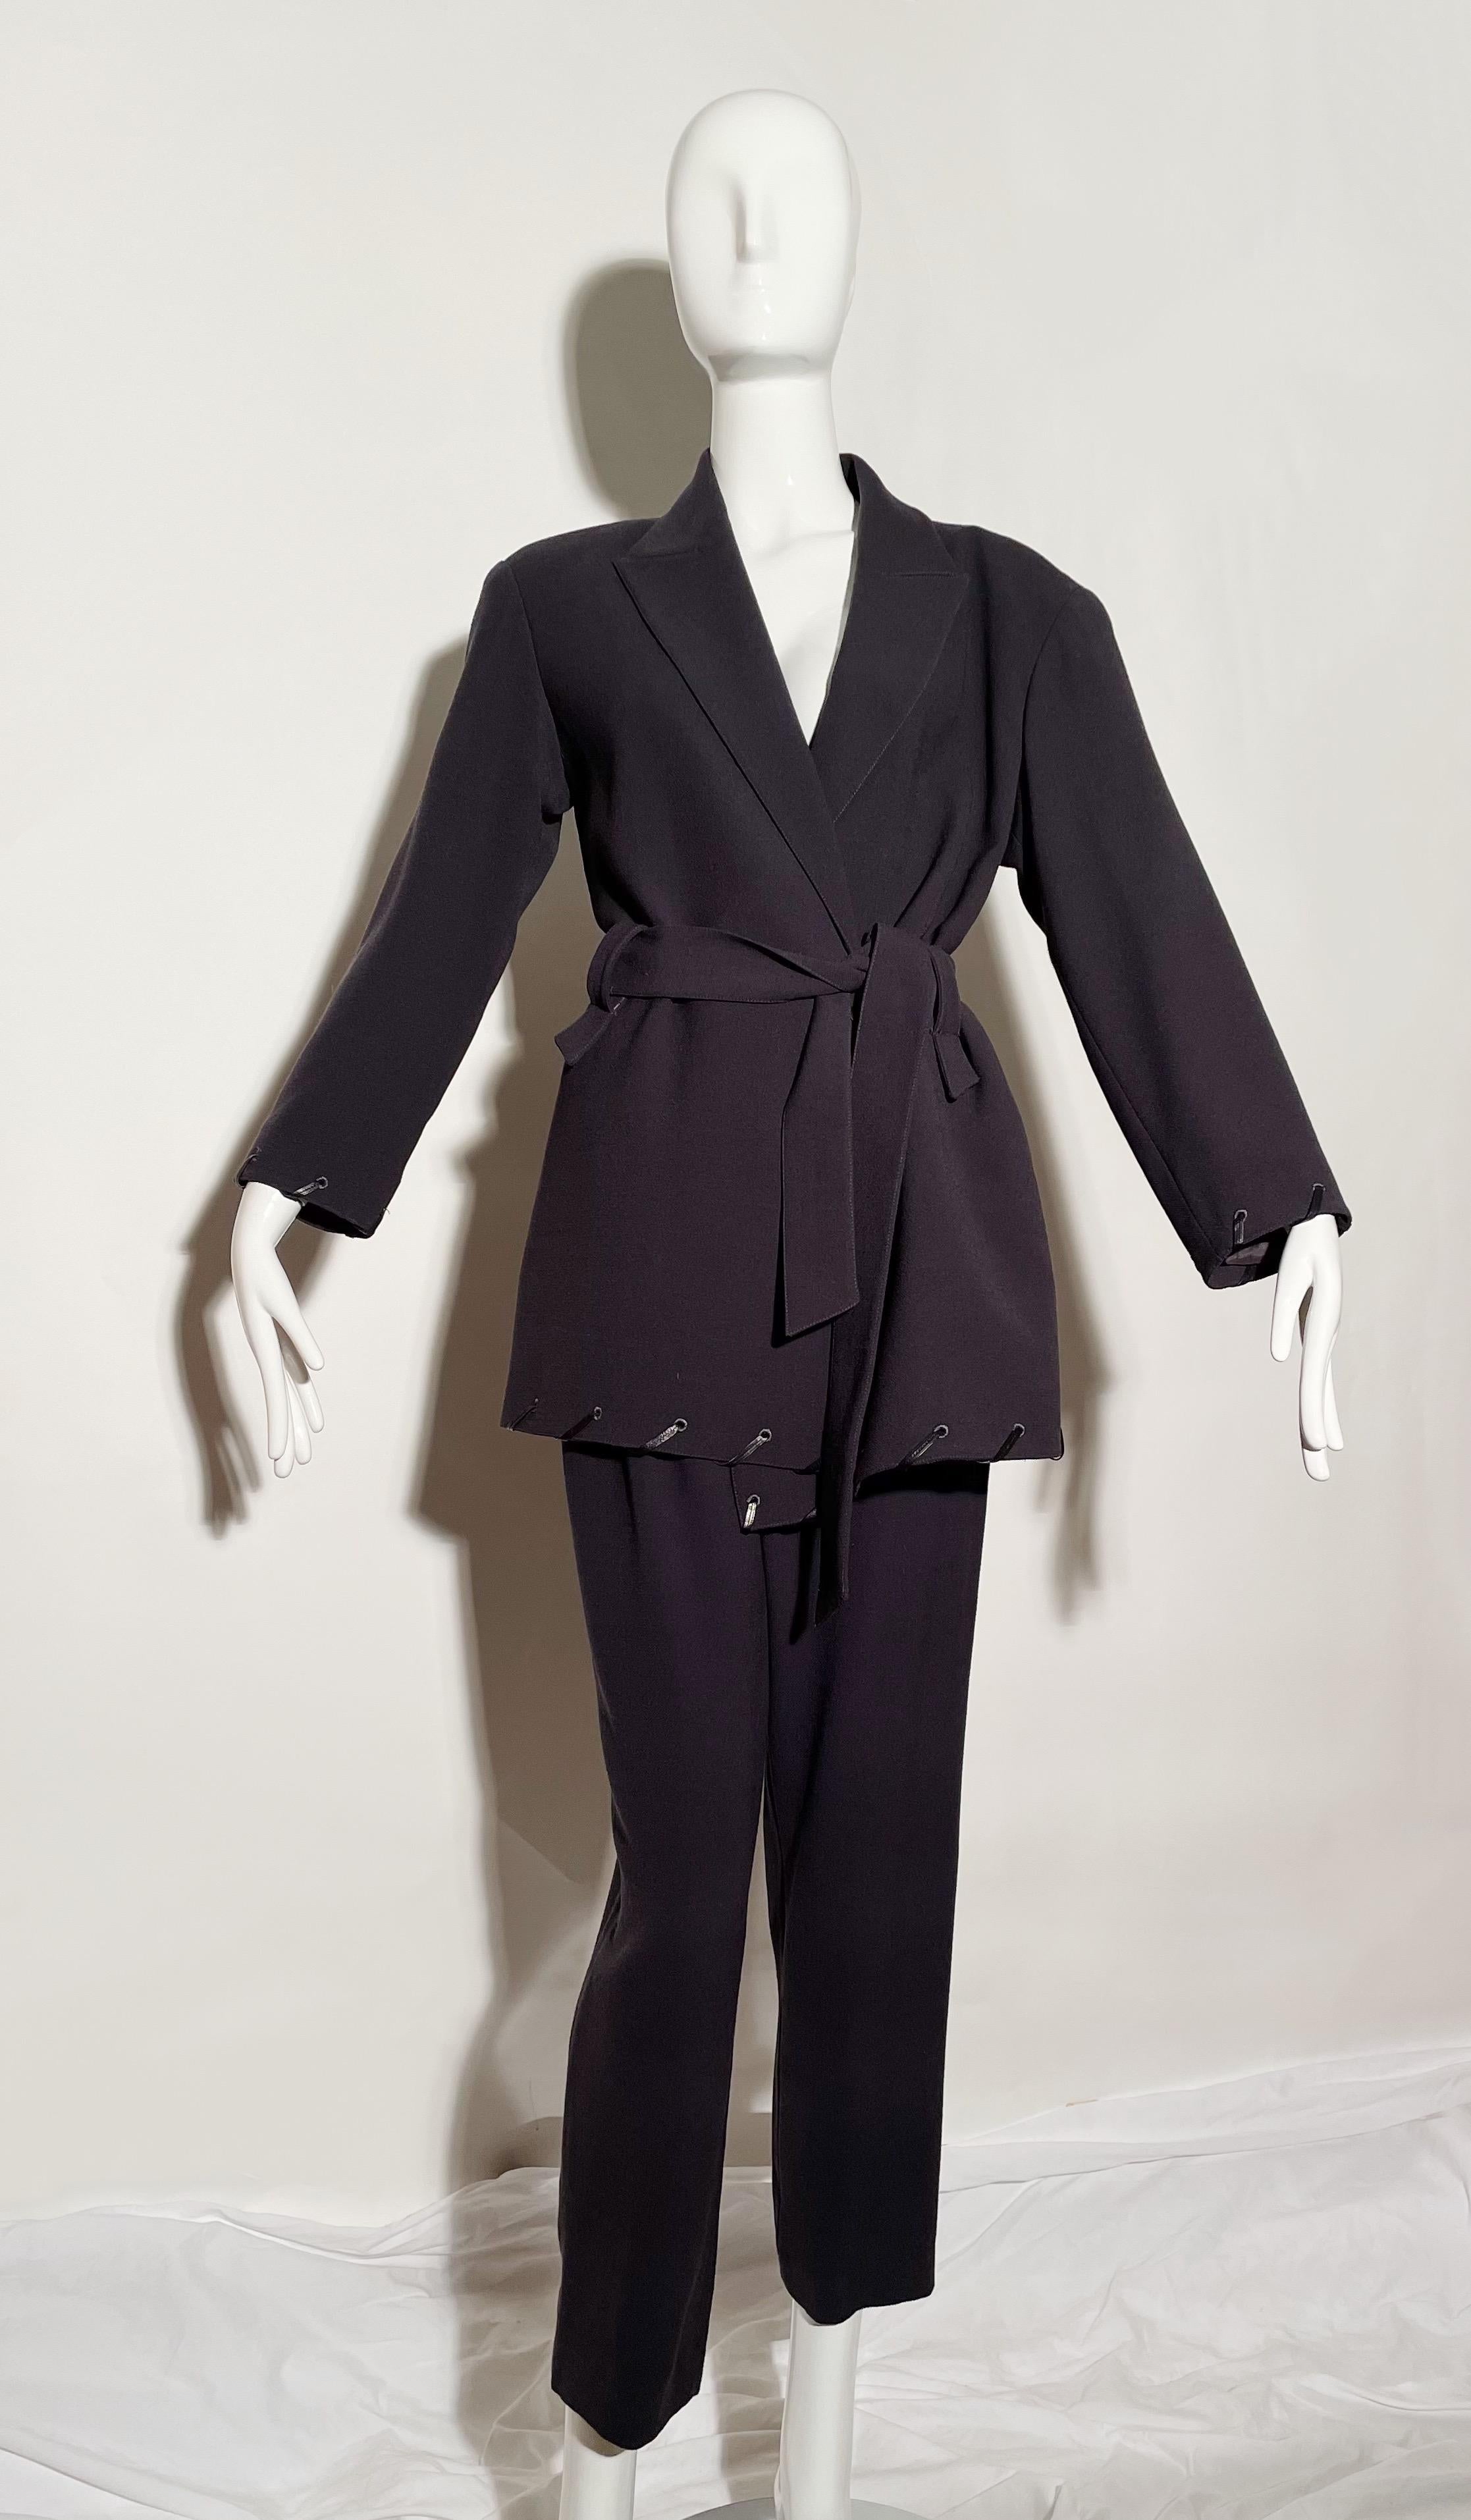 Charcoal grey pant suit. Woven leather trim. Belted. Shoulder pads. Side zipper on pants. Lined. Made in Italy. 
*Condition: Excellent vintage condition. No visible Flaws.

Measurements Taken Laying Flat (inches)—
Shoulder to Shoulder: 17.5